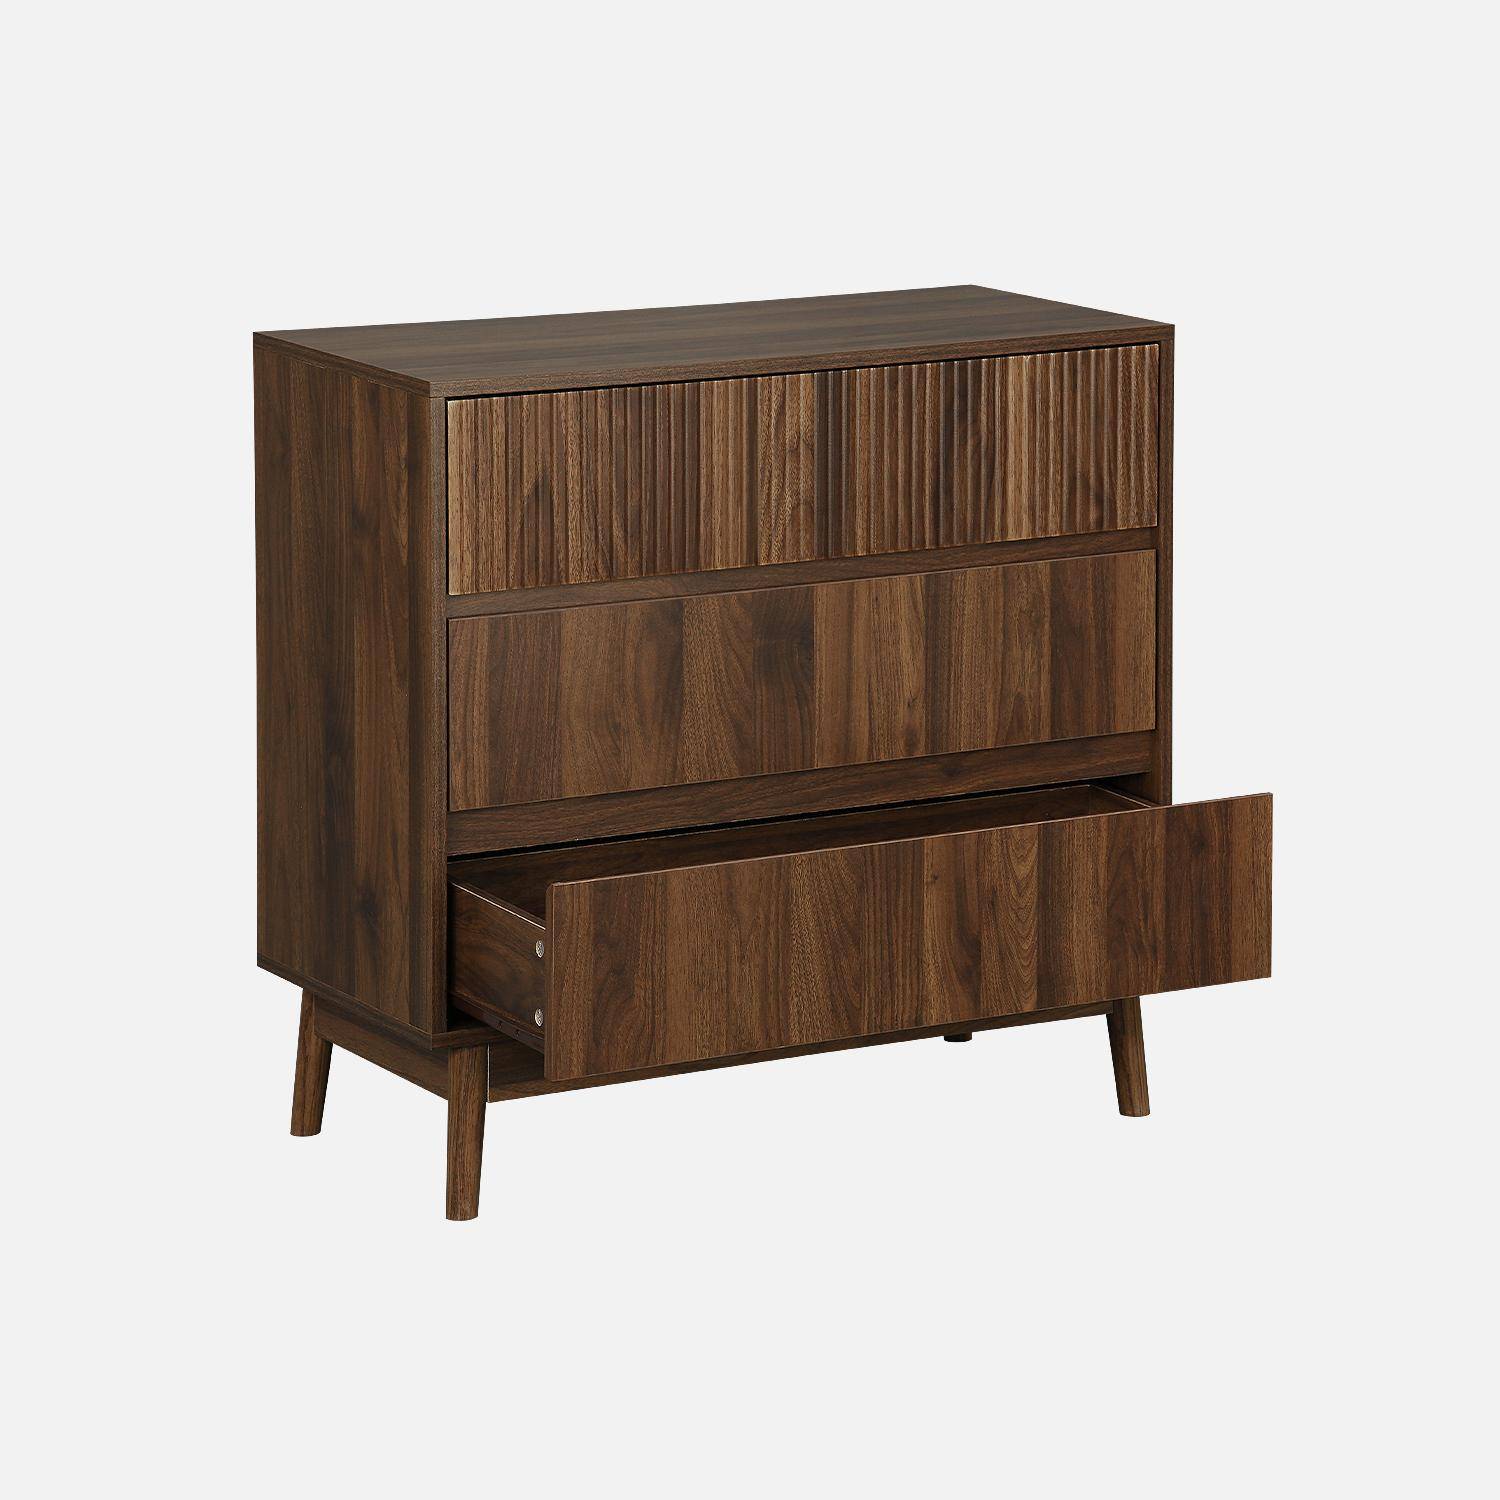 Grooved wood detail 3-drawer chest, 80x40x80cm - Linear - Dark Wood colour,sweeek,Photo5